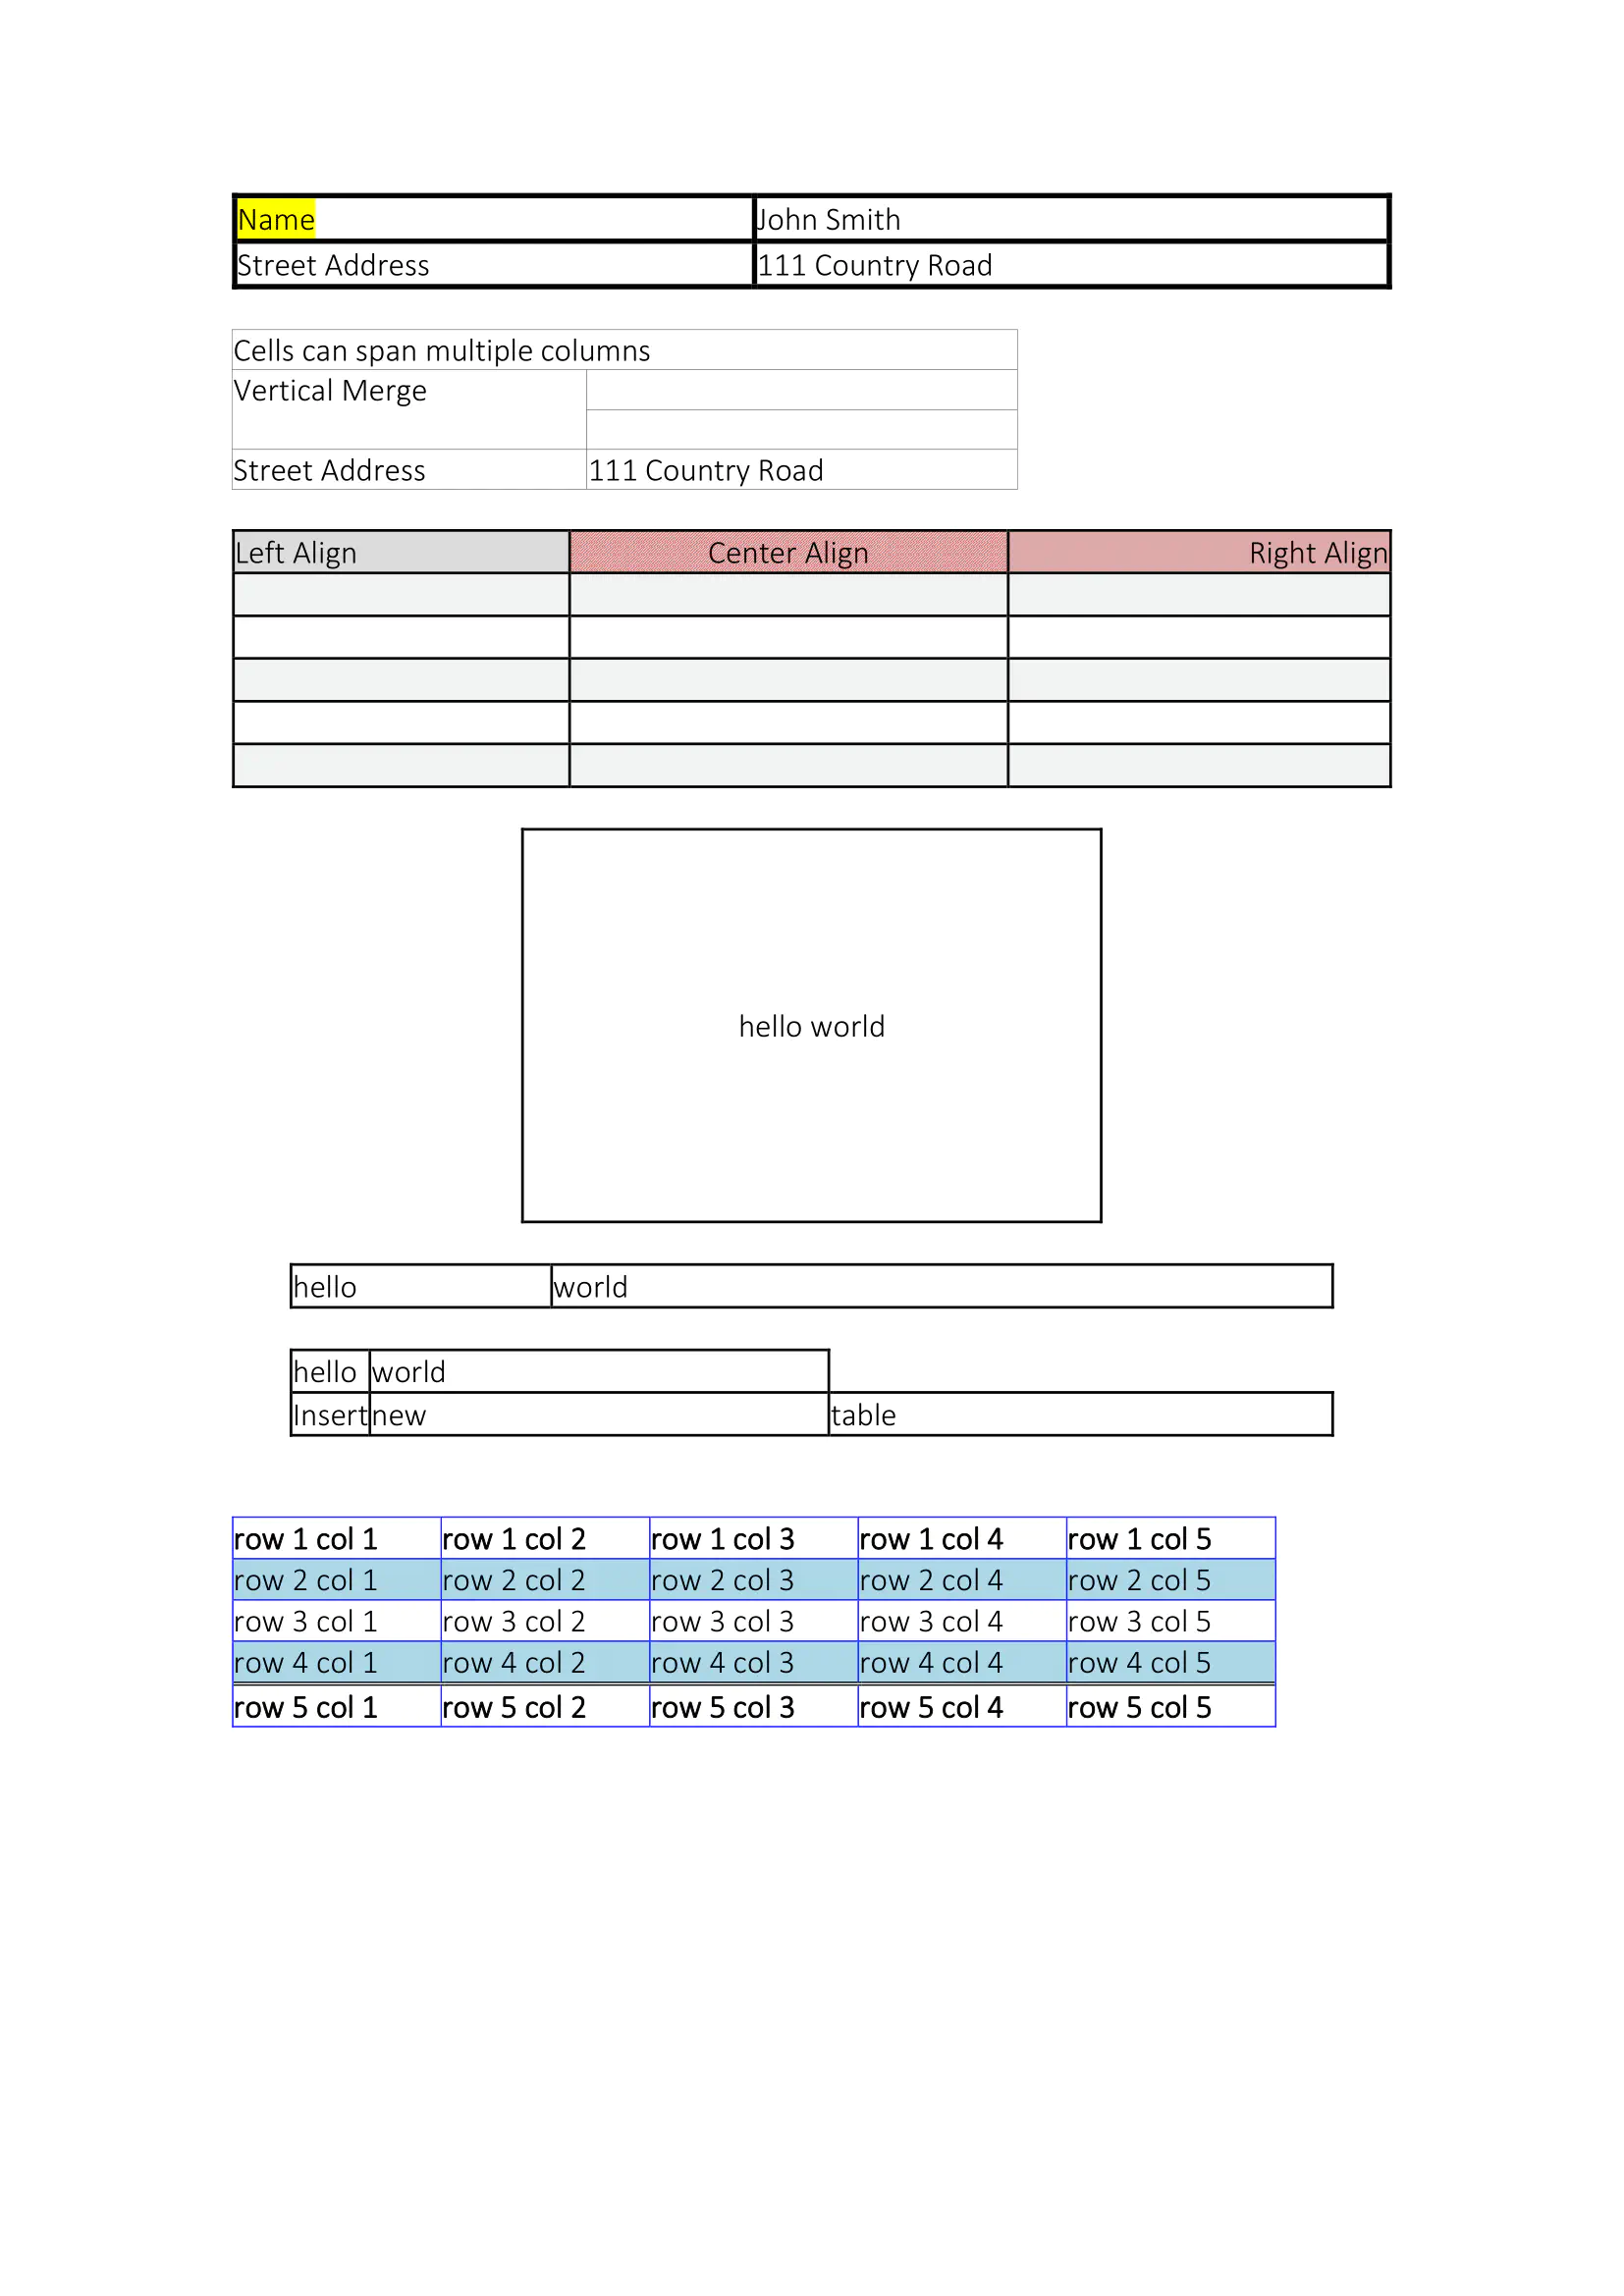 Page with custom tables